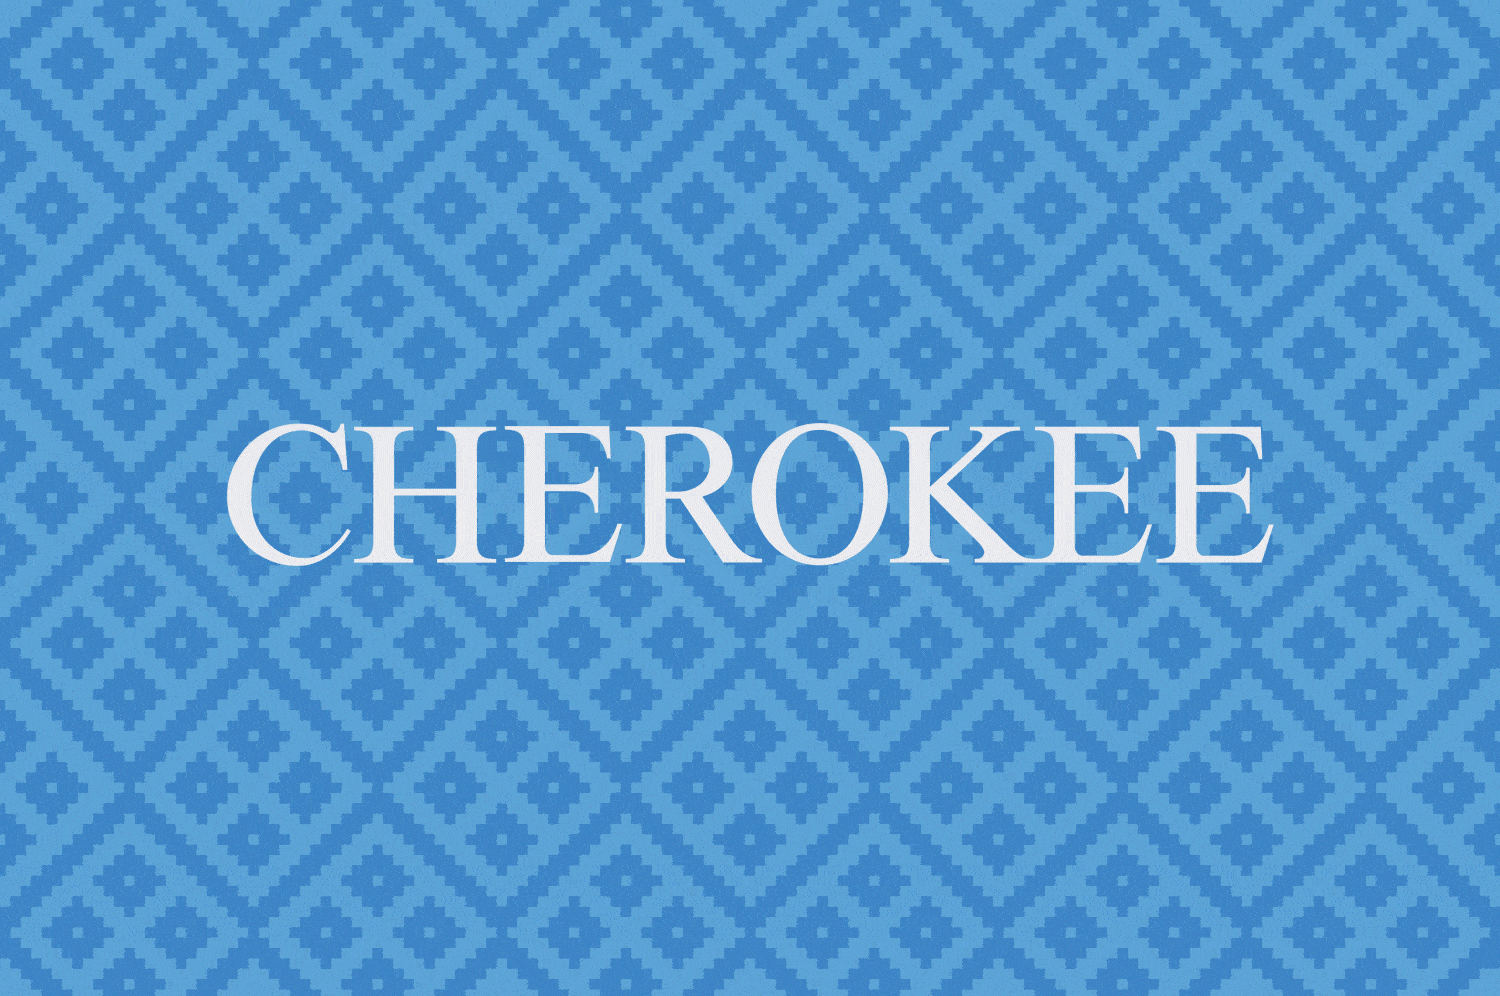 the word Cherokee switching from English to Cherokee